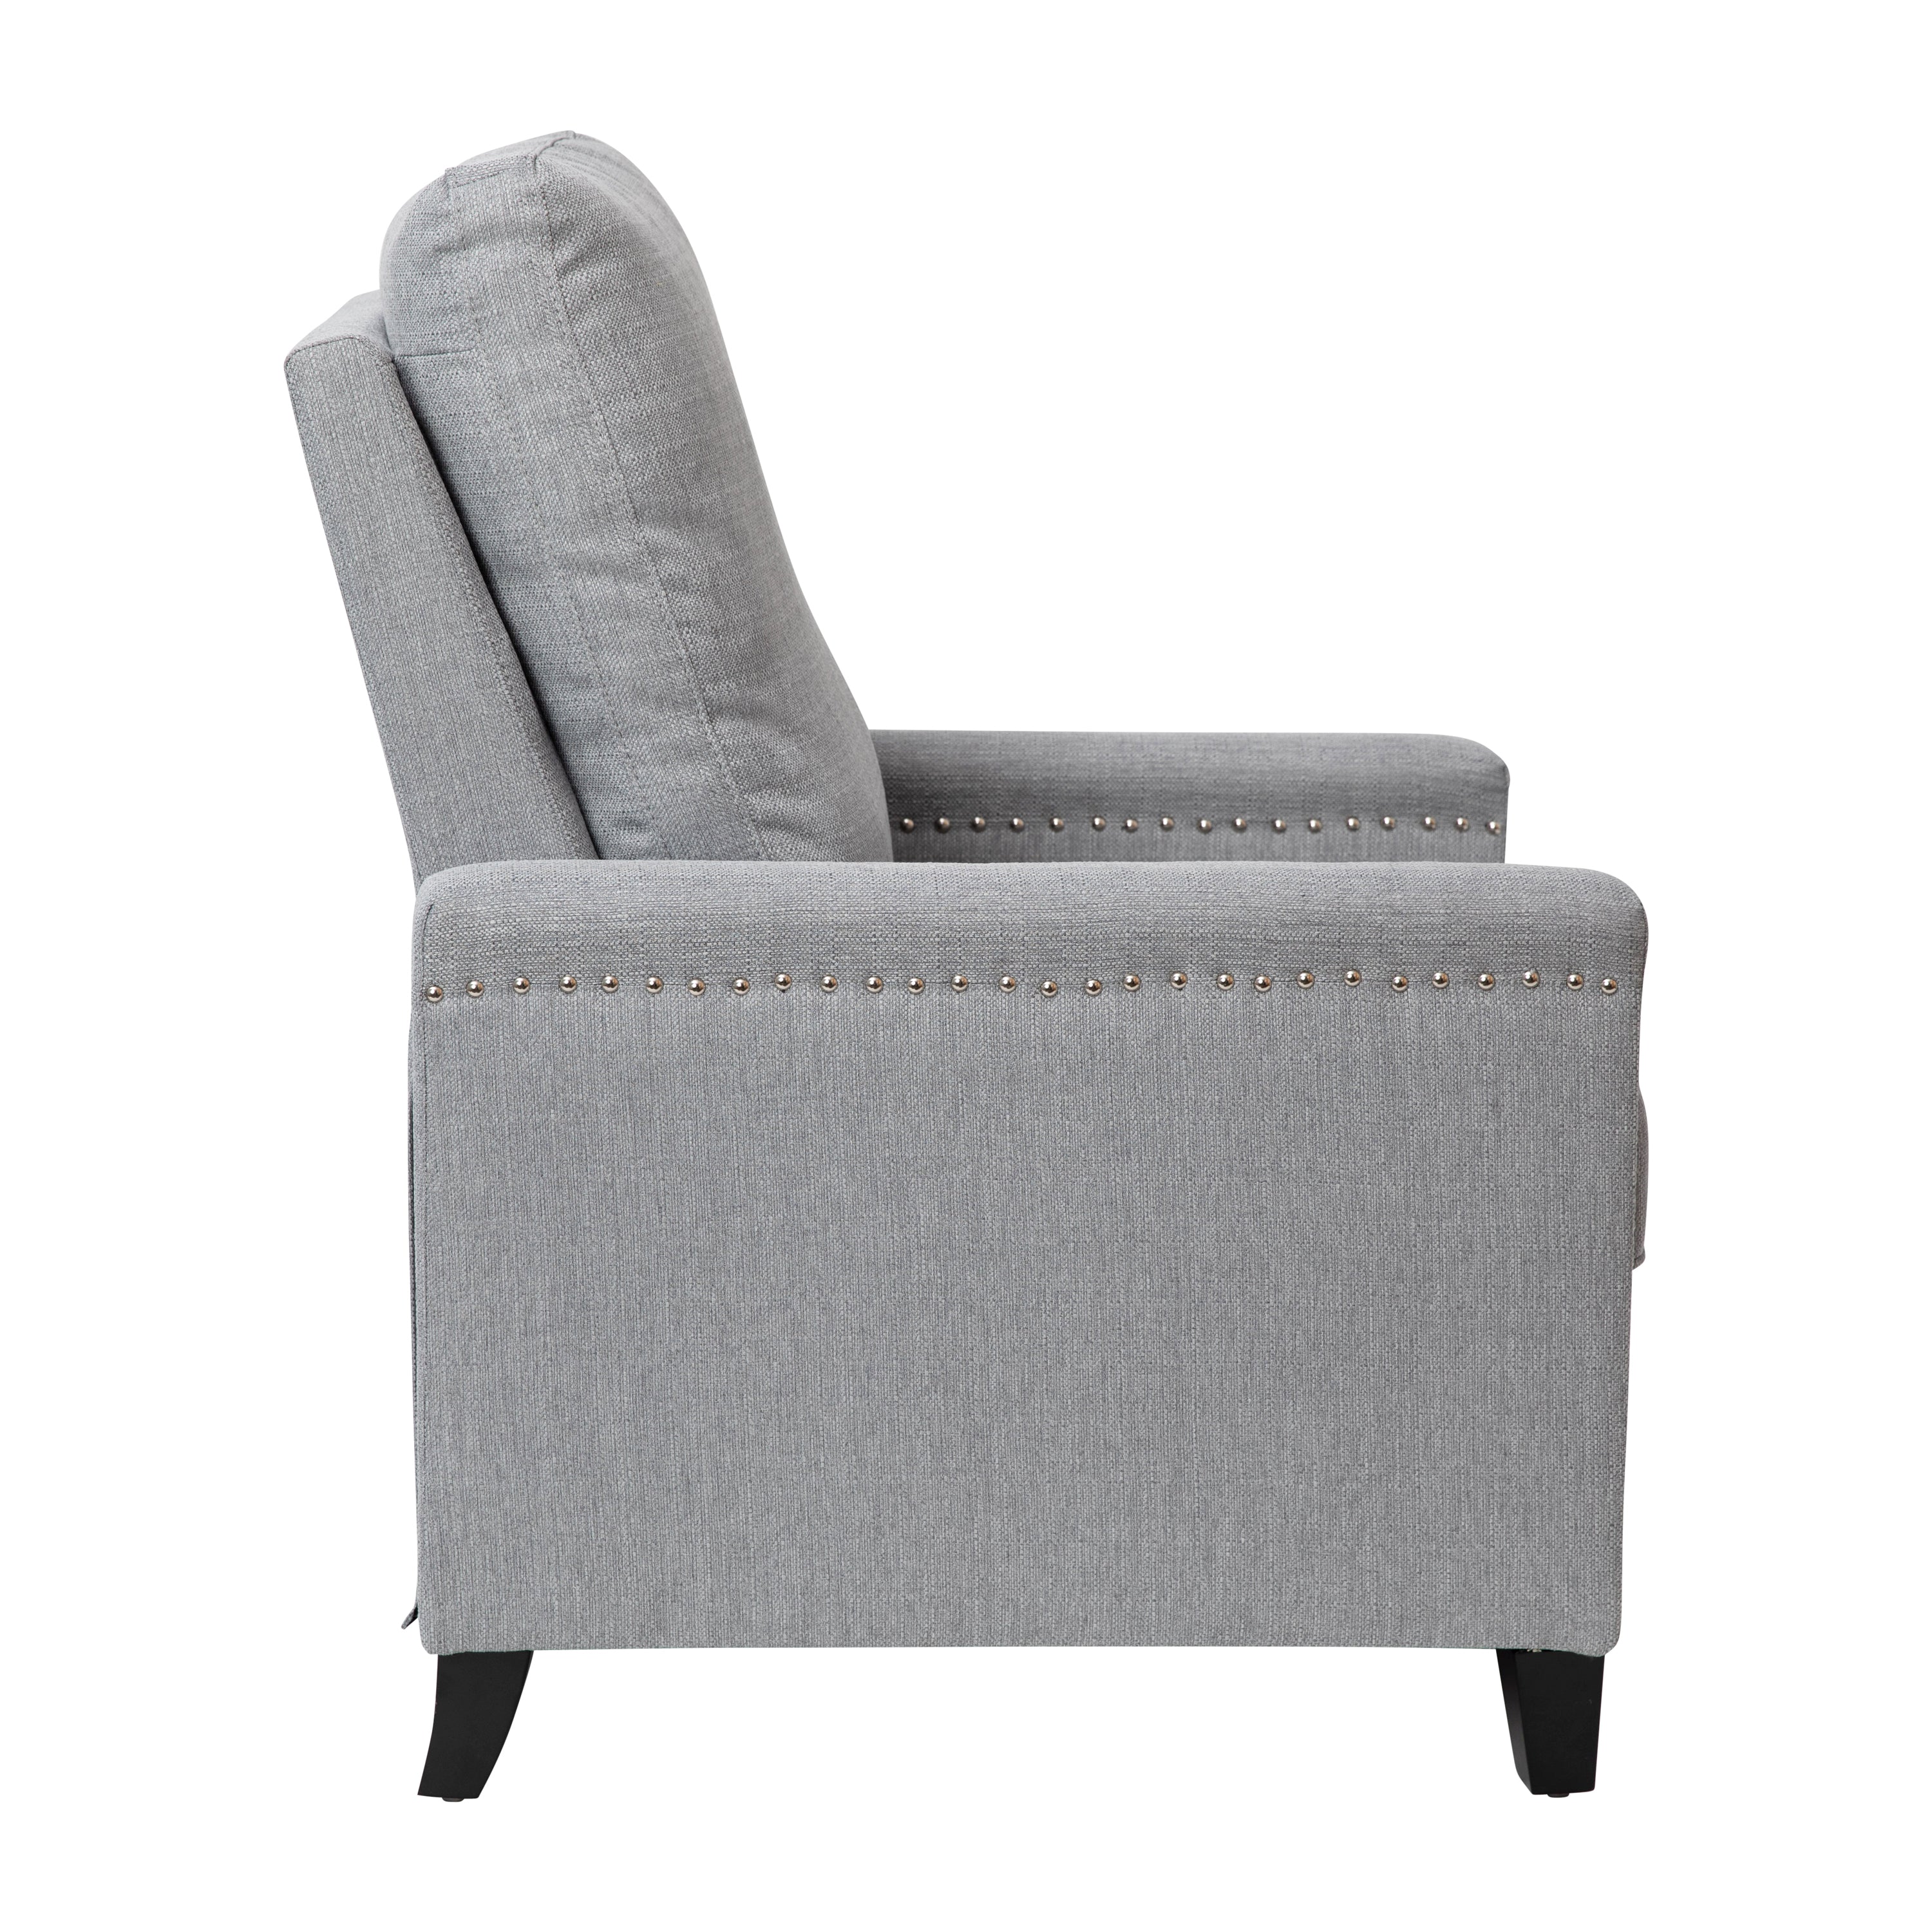 Carson Transitional Style Push Back Recliner Chair - Pillow Back Recliner - Polyester Fabric Upholstery - Accent Nail Trim-Push Back Recliners-Flash Furniture-Wall2Wall Furnishings